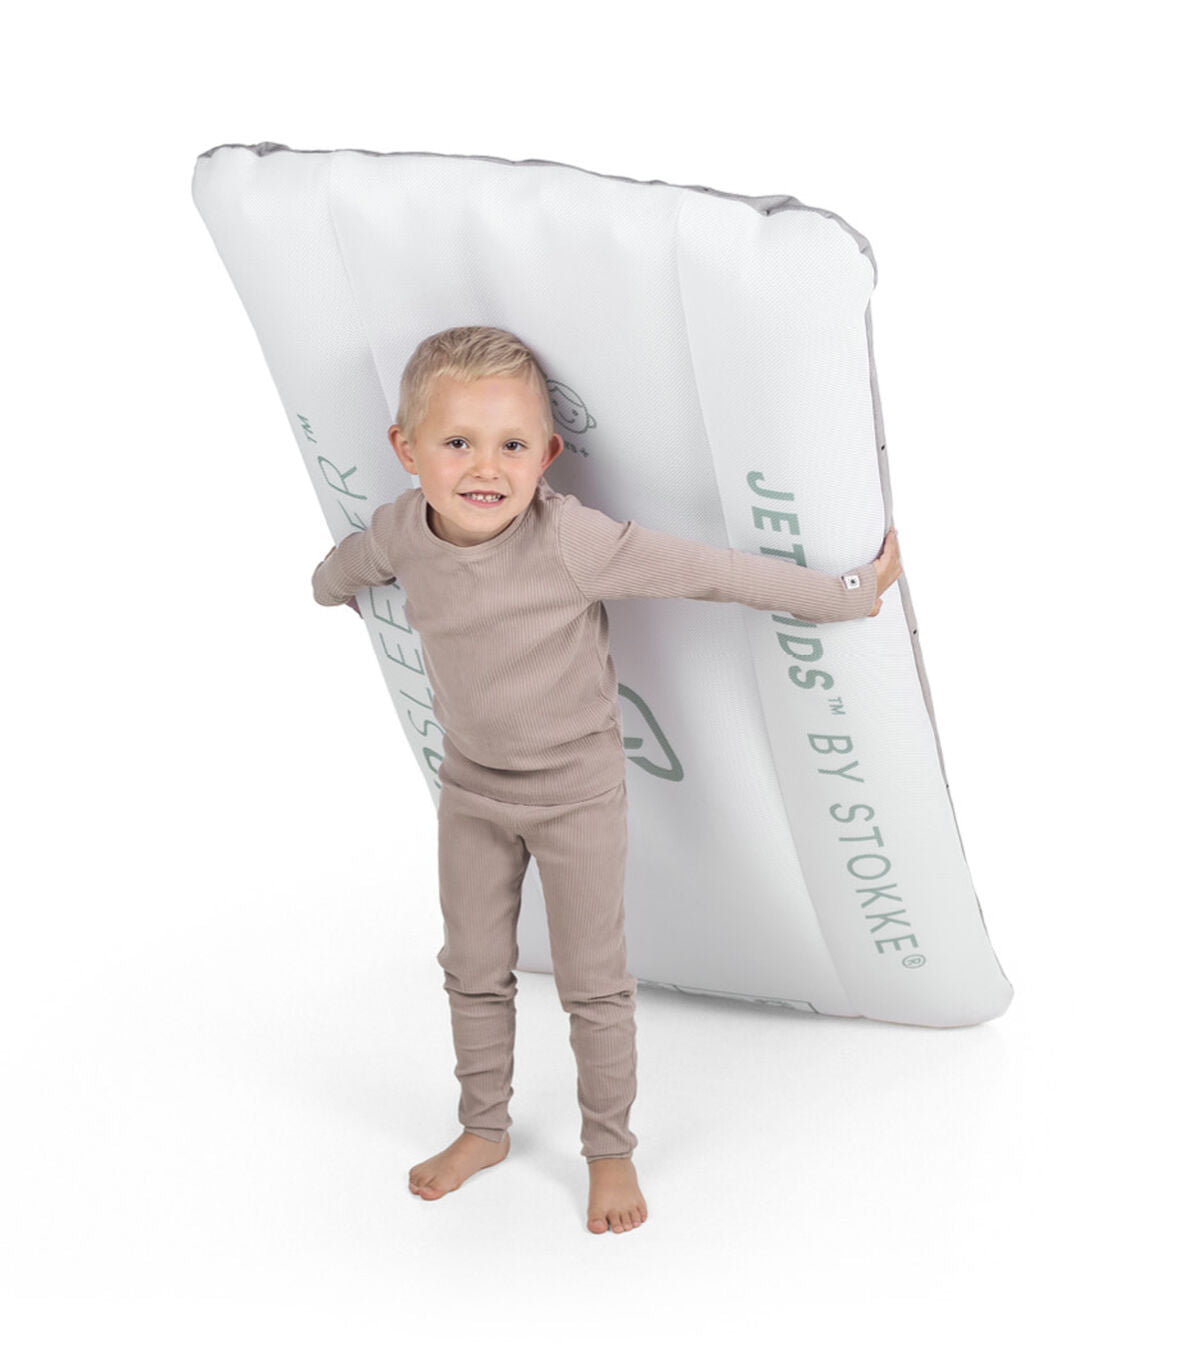 JetKids™ by Stokke CloudSleeper™ Inflatable Kids' Bed – Channing 